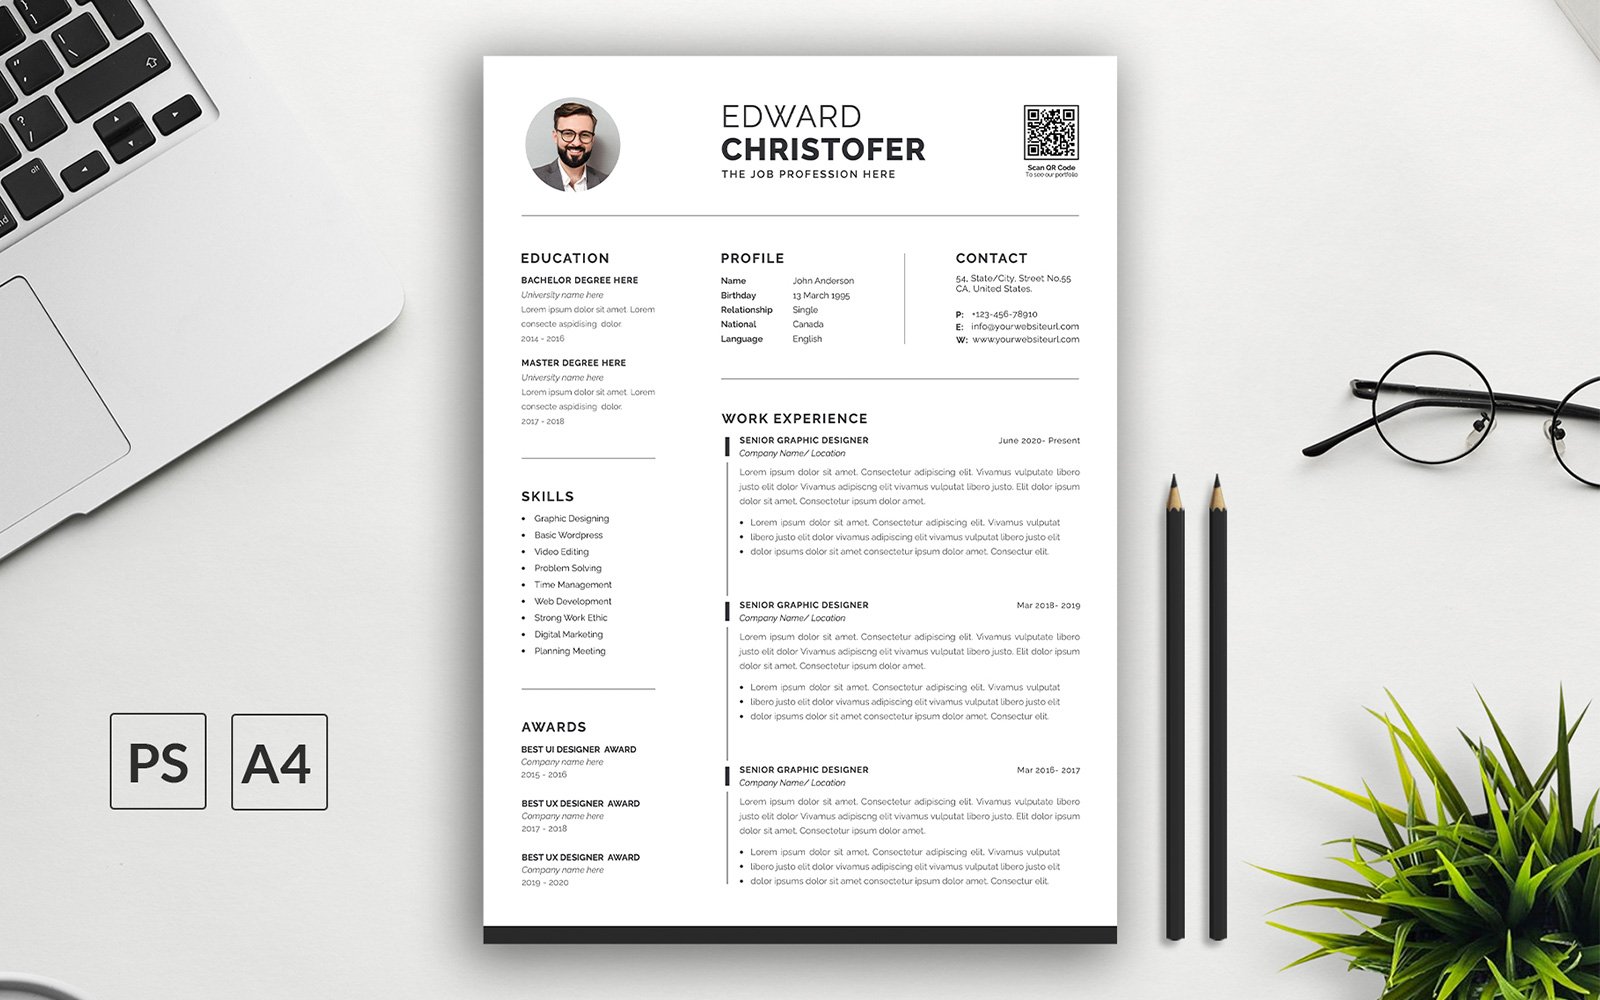 Template #322477 Resume Template Webdesign Template - Logo template Preview